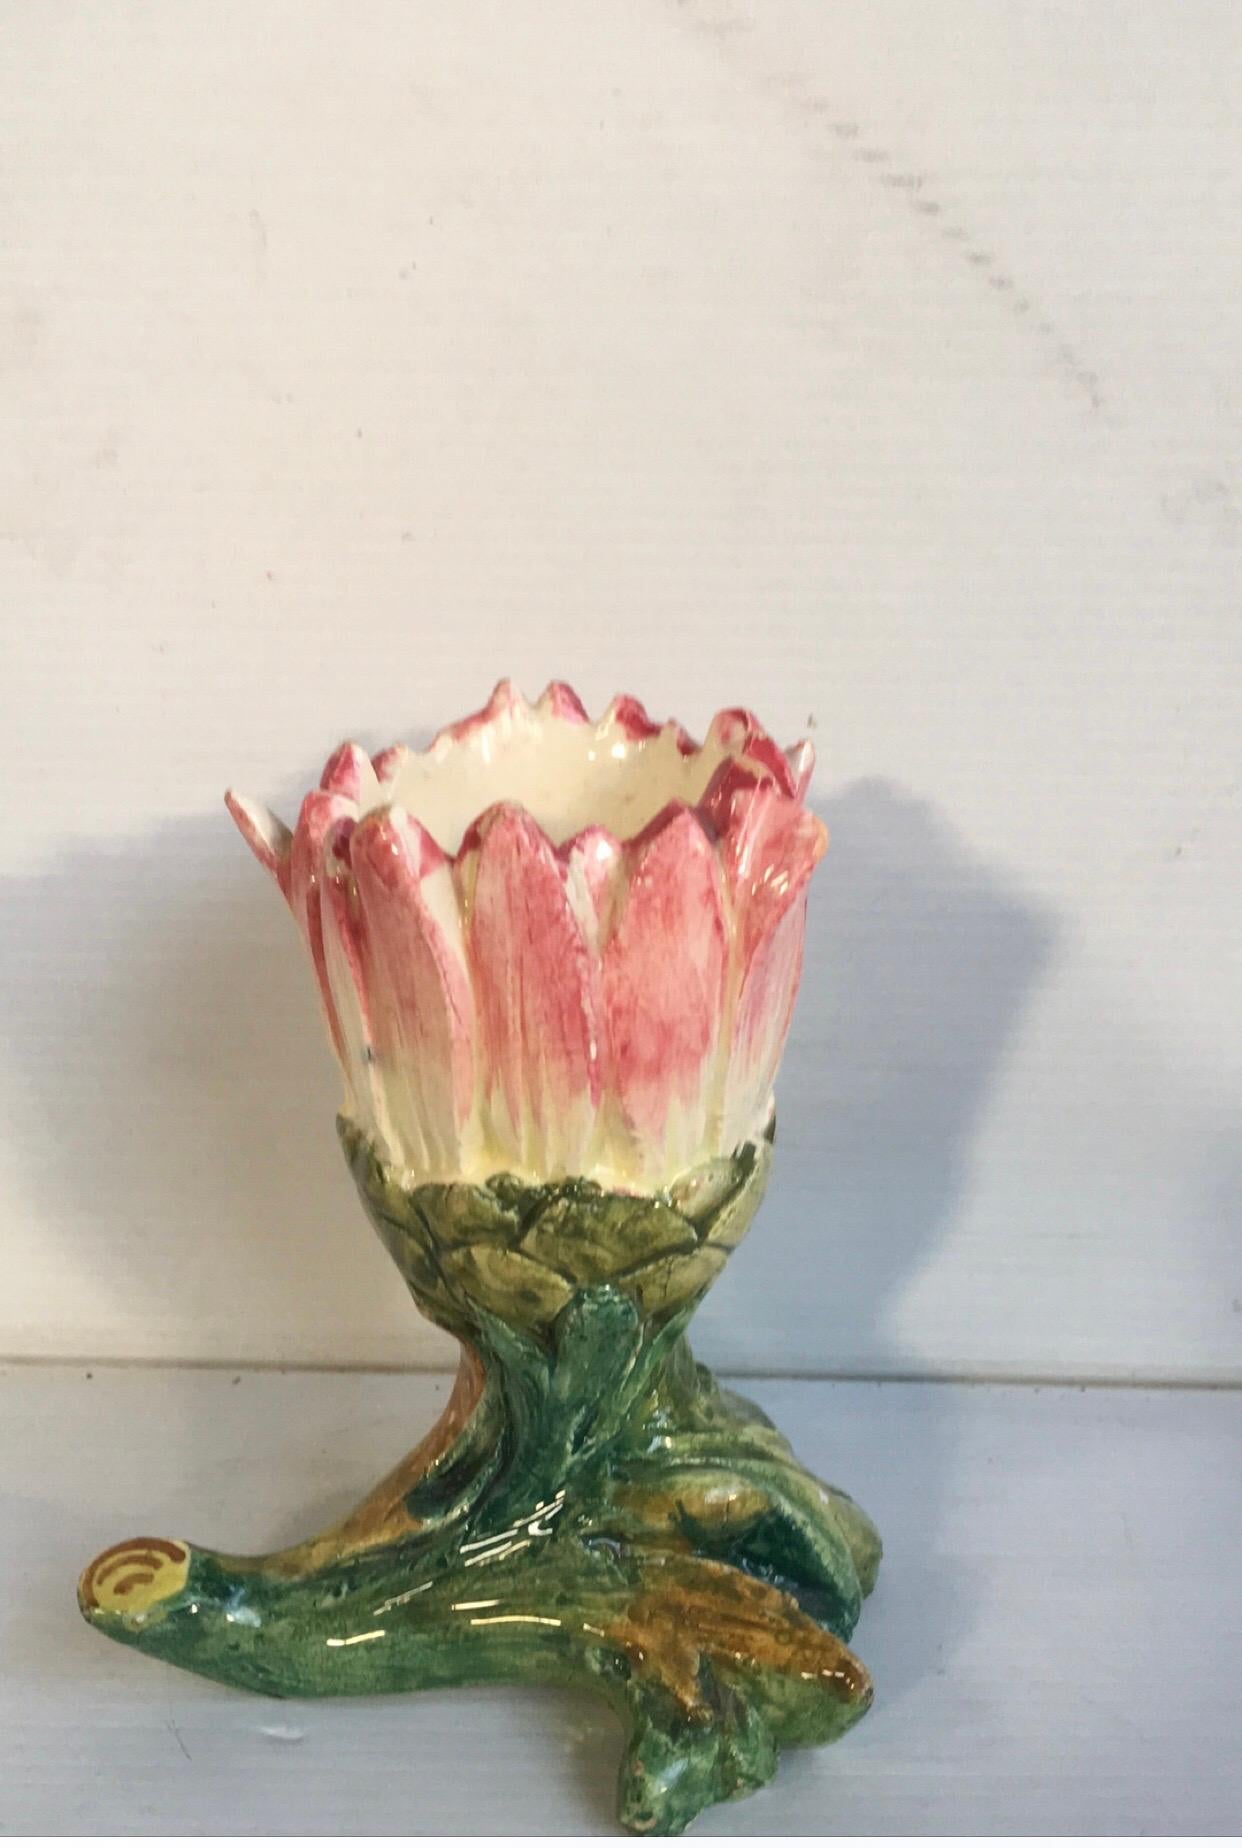 19th century Majolica Daisy vase Delphin Massier.
The Massier family are known for the quality of their unique enamels and paintings. They produced an incredible whole range of flowers like iris, roses, daisies, wild roses, orchids, pansies. They